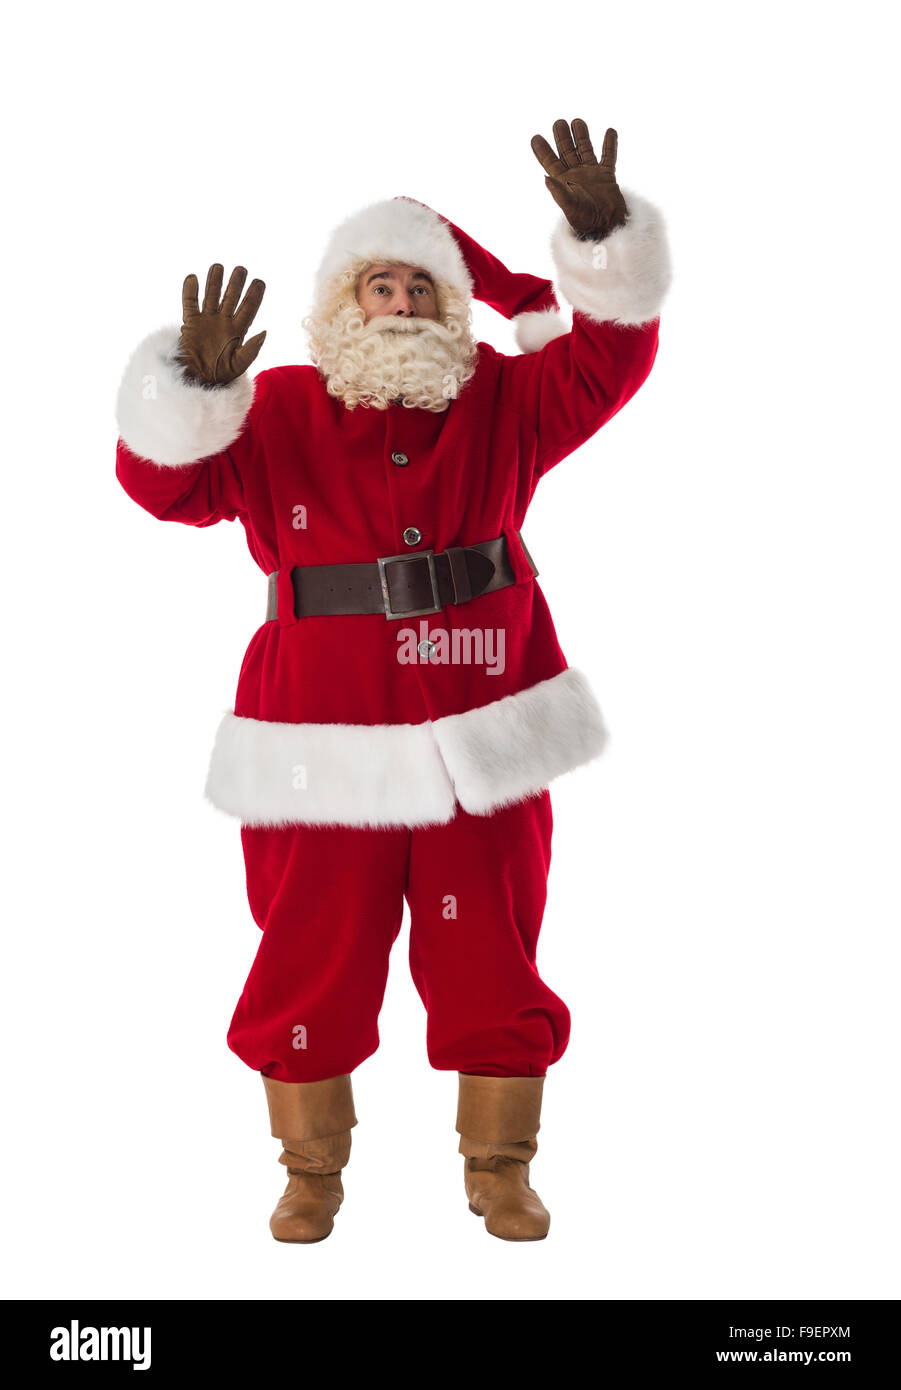 Santa Claus working with virtual interface Portrait Isolated on White Background Stock Photo